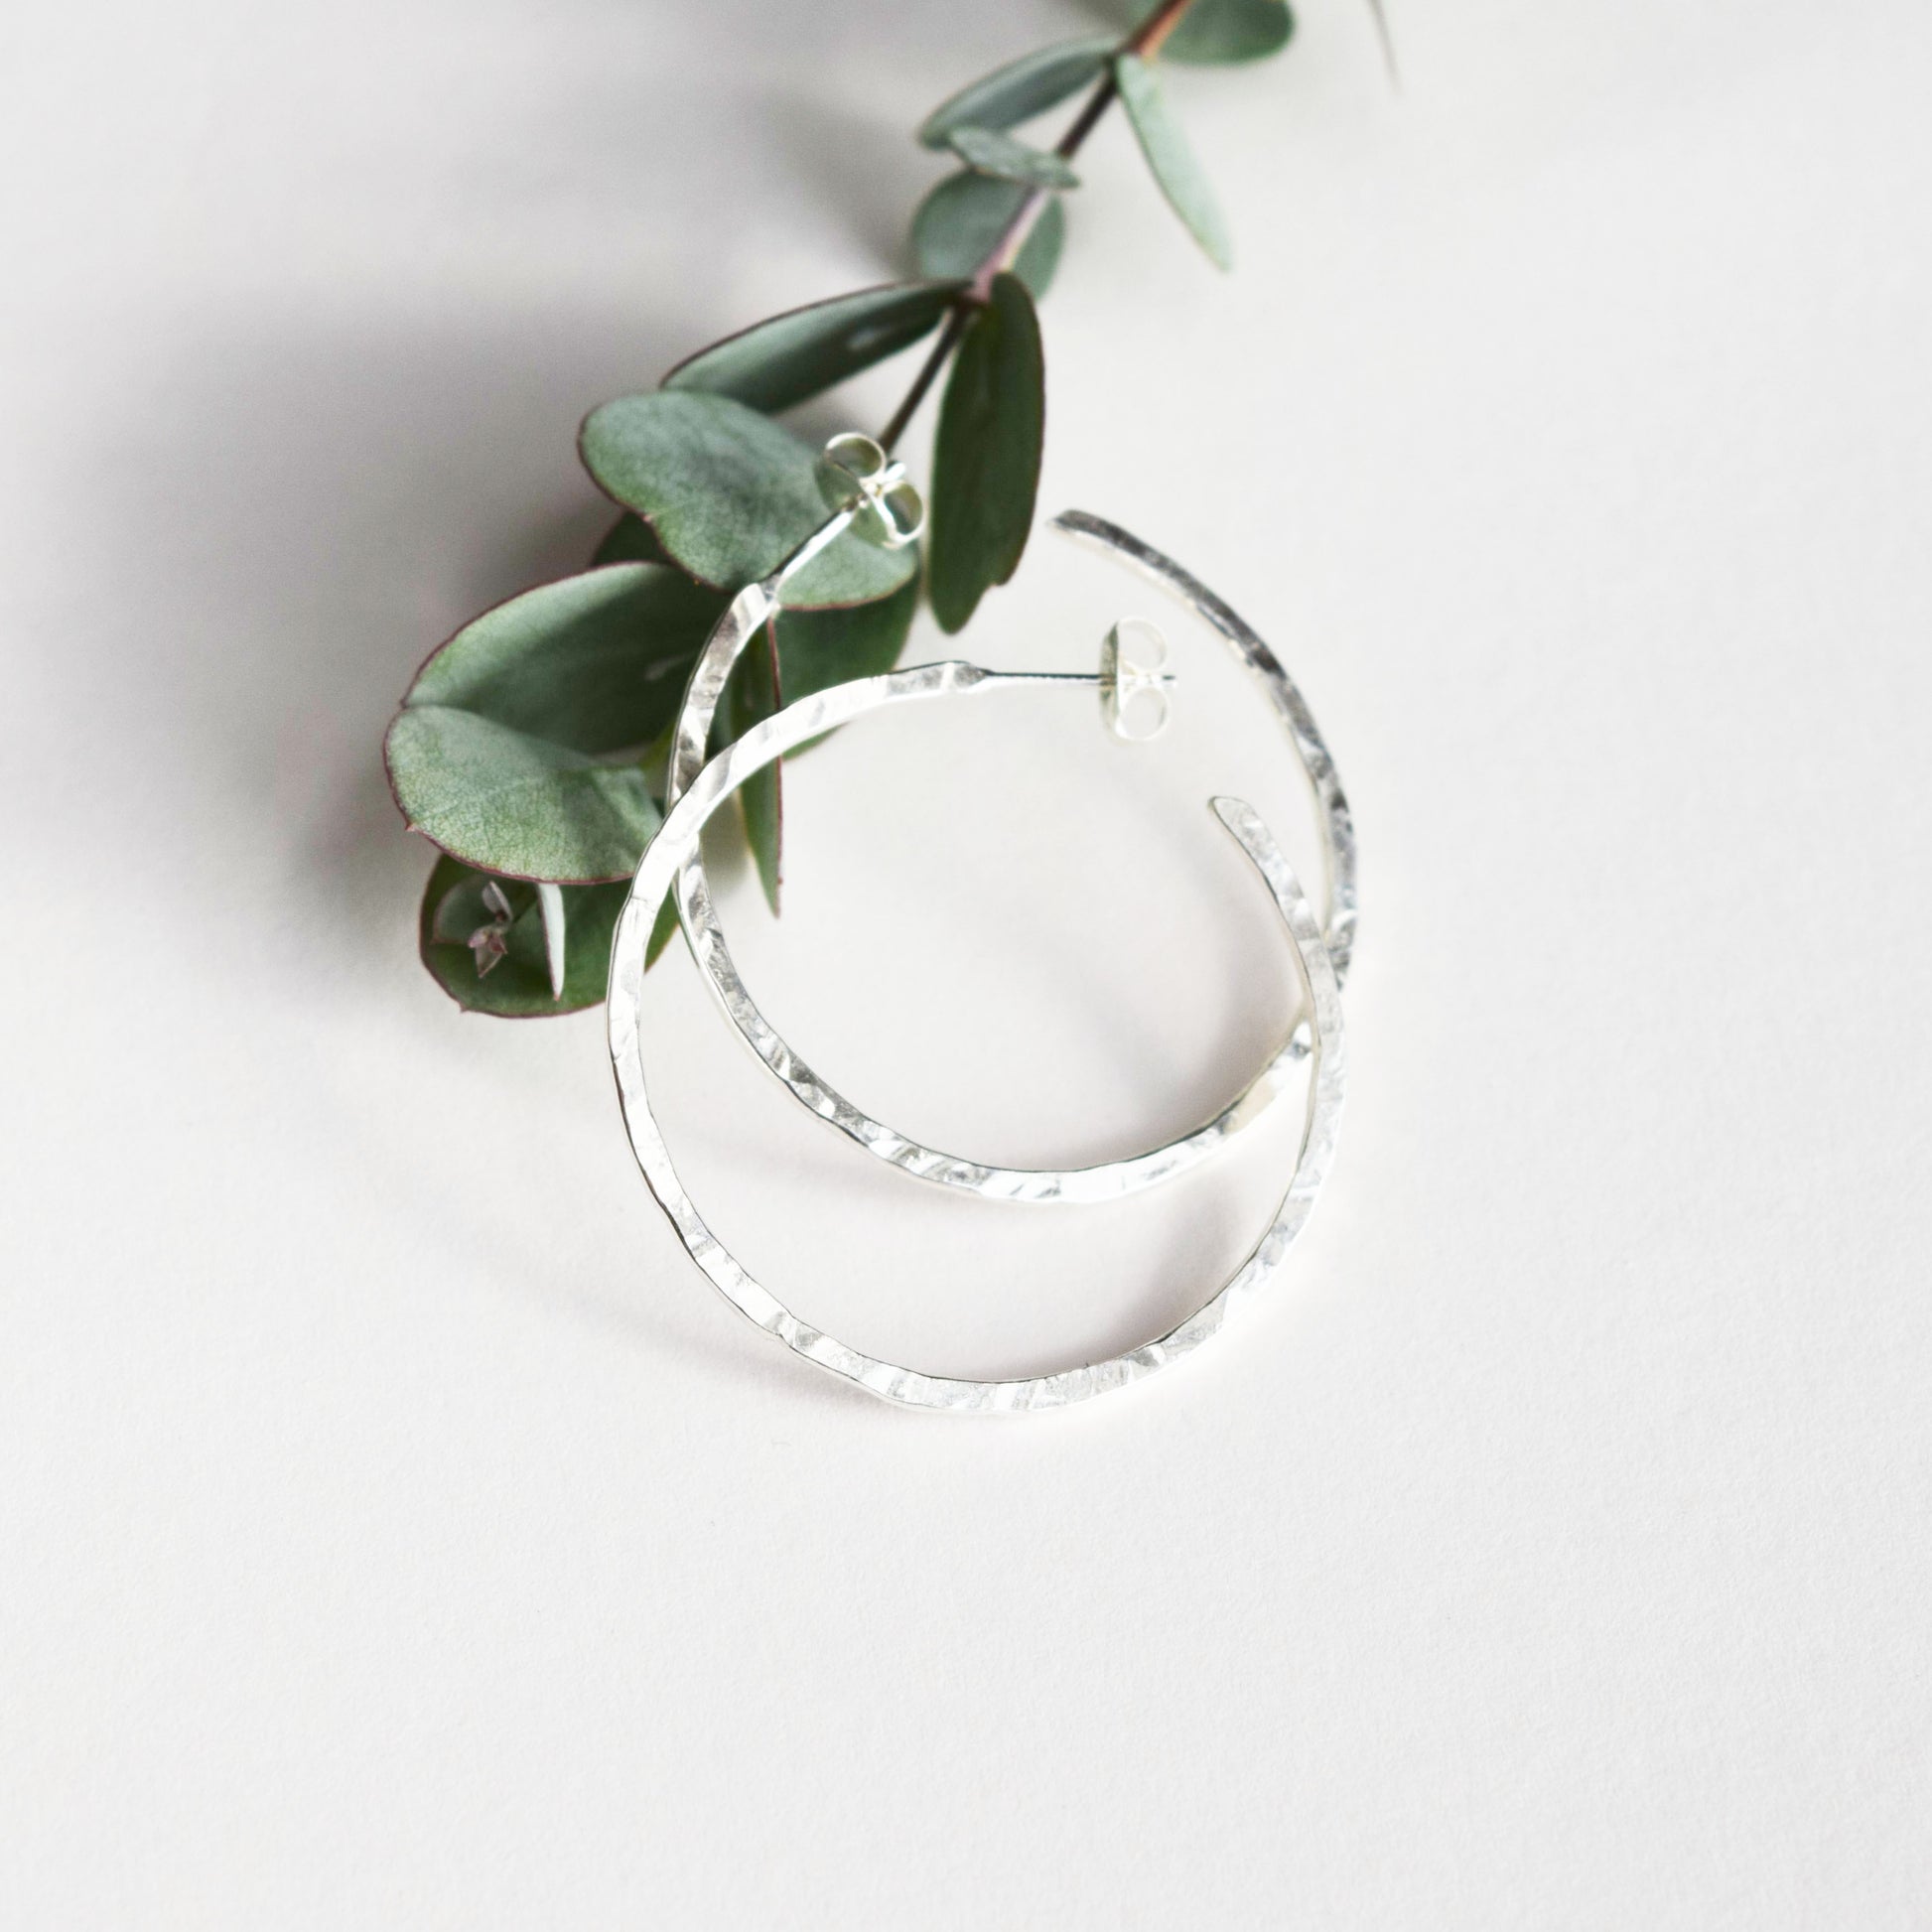 Mid sized hoop earrings on white background showing hammered finish